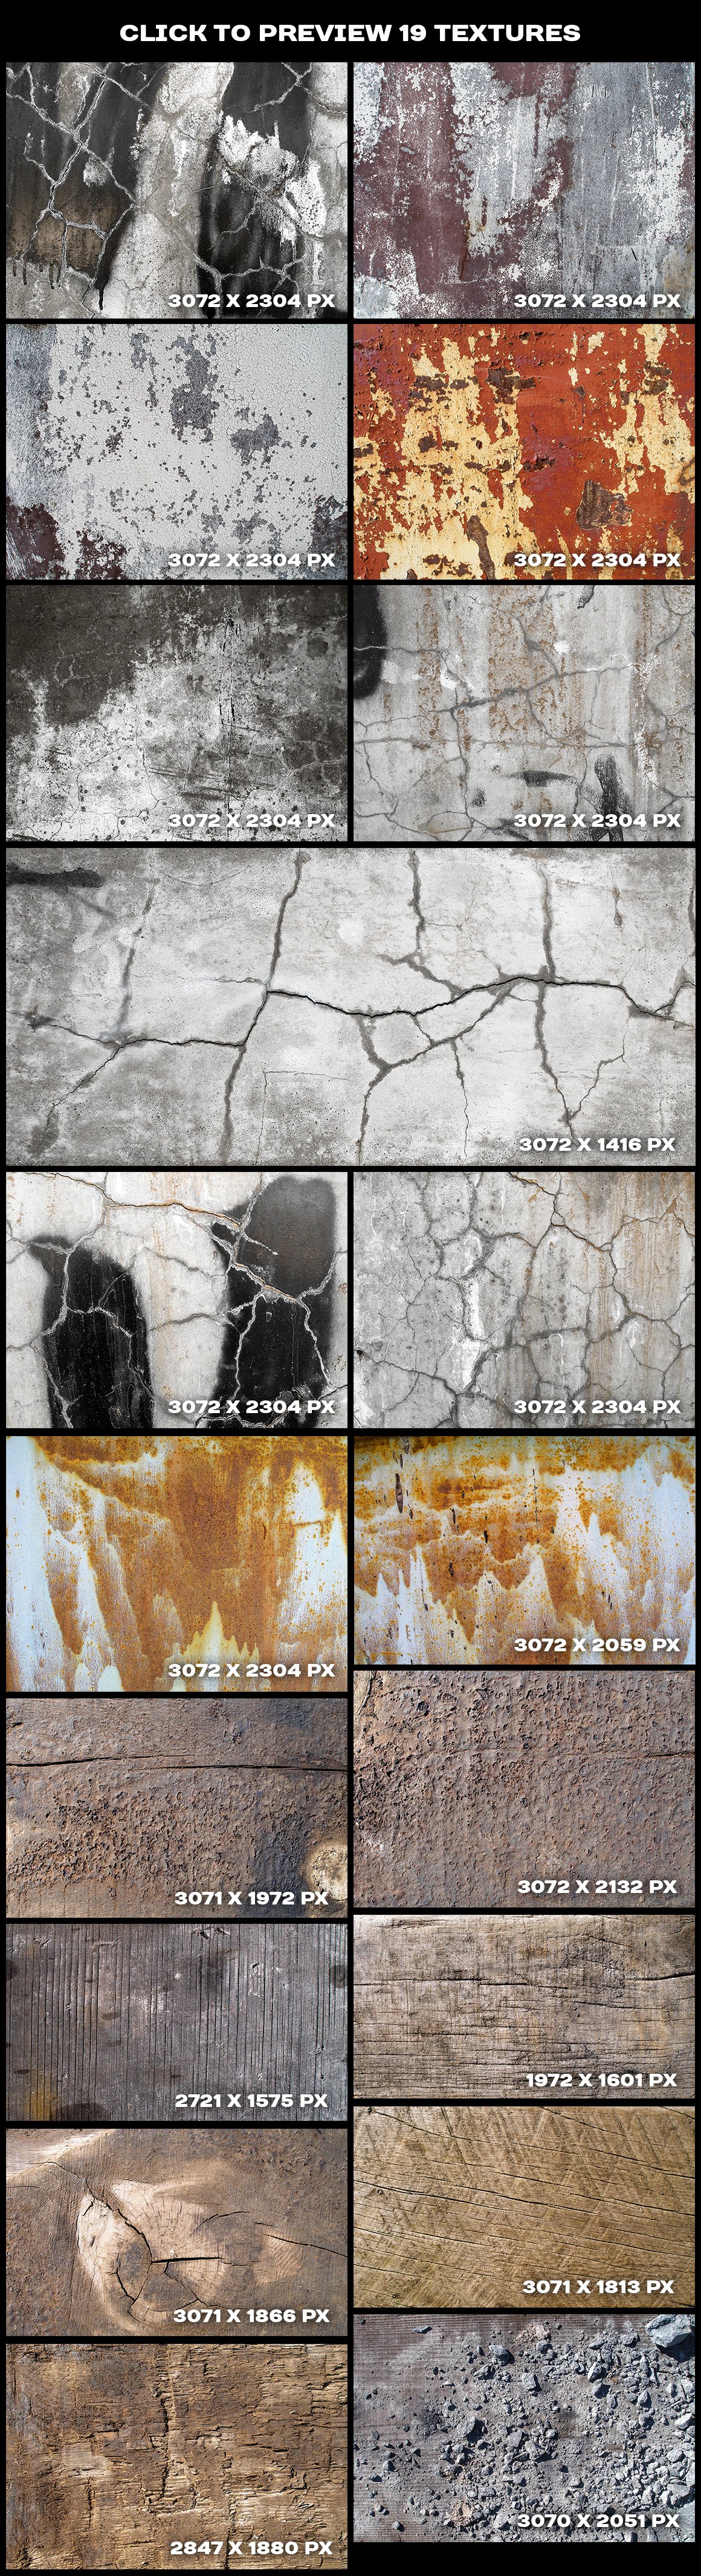 Cracked paint and concrete textures preview image.